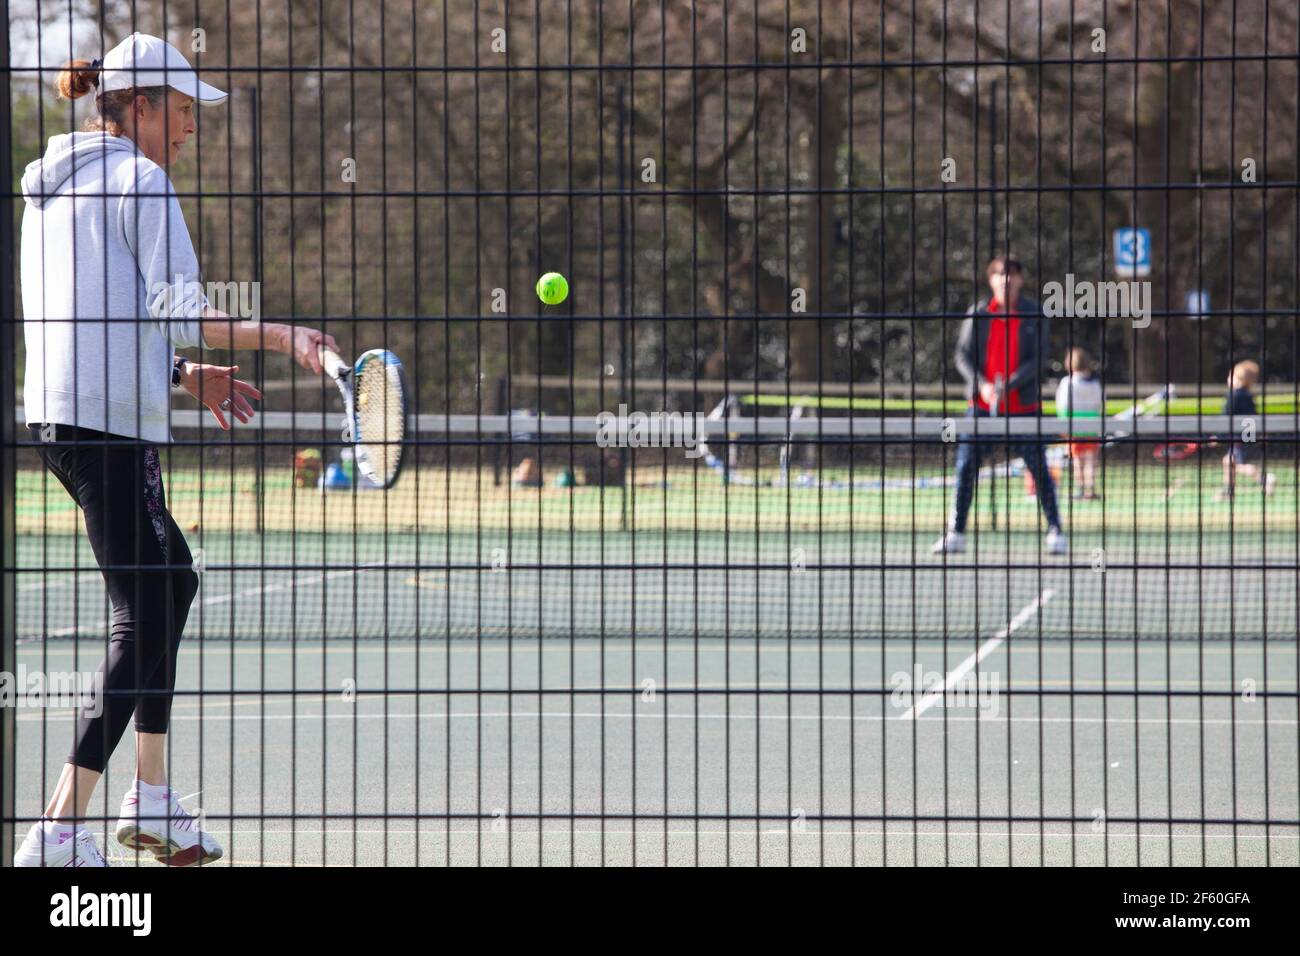 London, UK, 29 March 2021: On Tooting Commons a woman plays tennis, which from today is permitted under the gradual easing of lockdown rules in England. Anna Watson/Alamy Live News Stock Photo